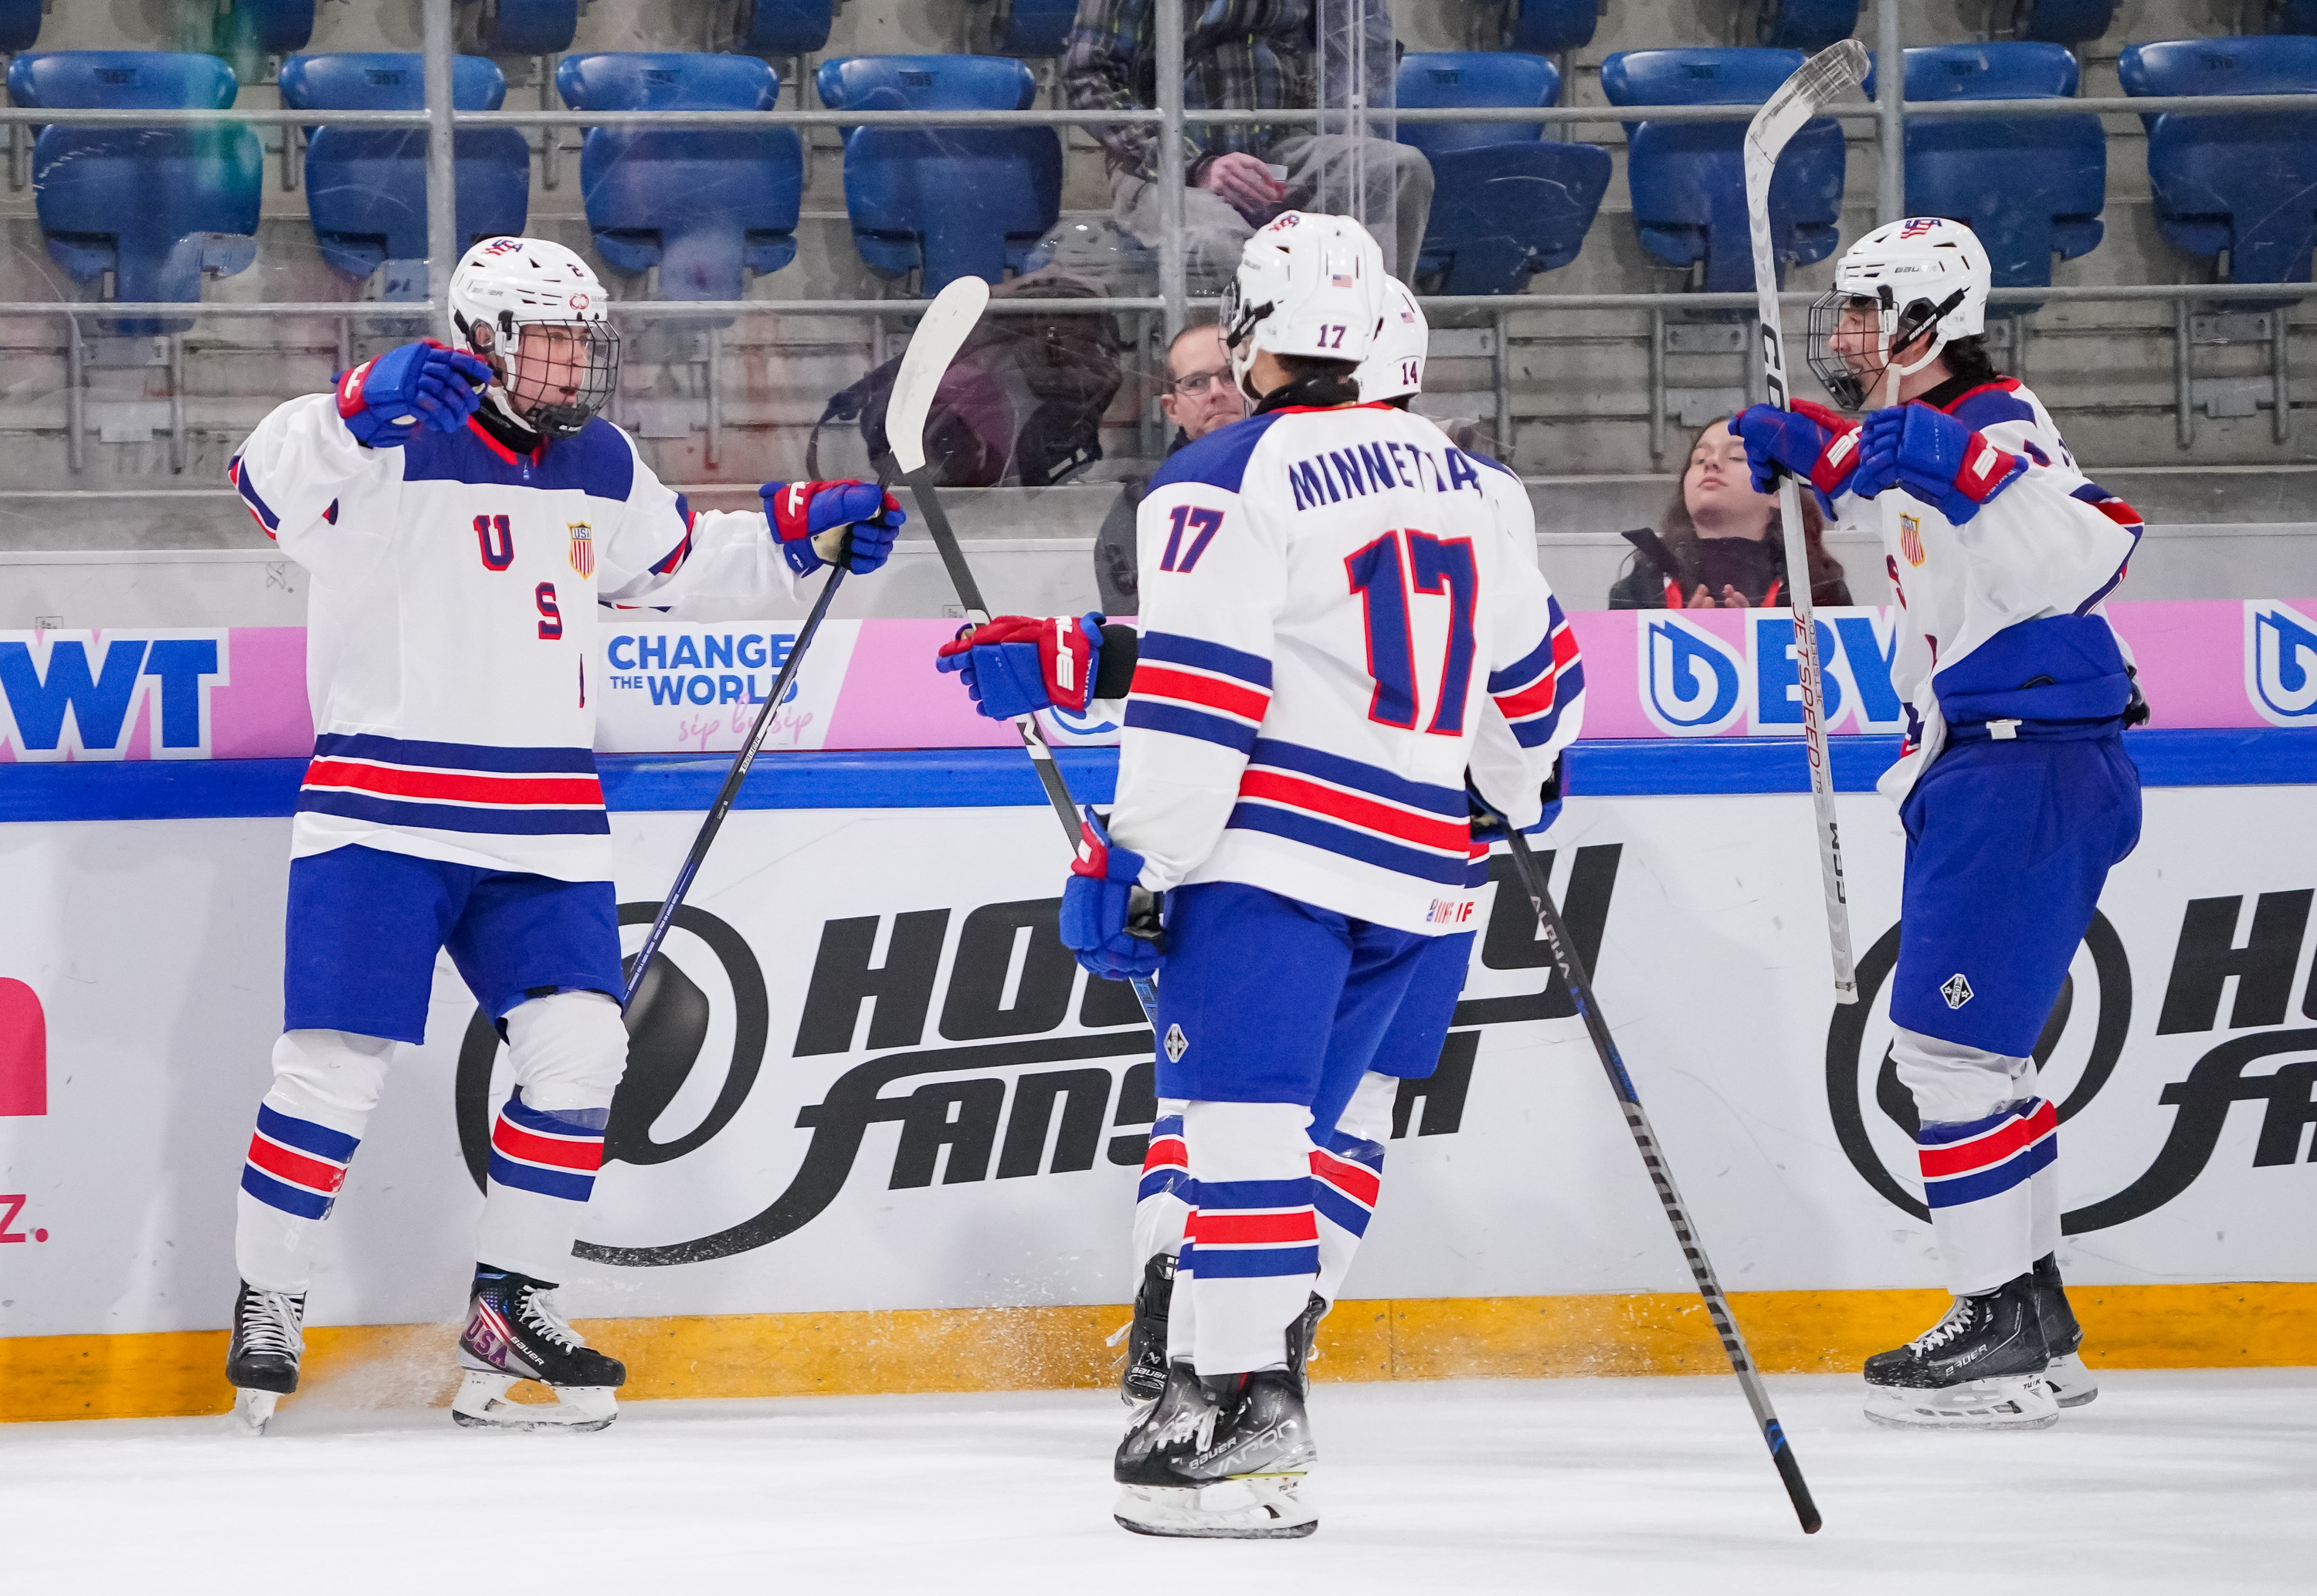 U.S. World Junior Jerseys from IIHF Tourney Up for Auction